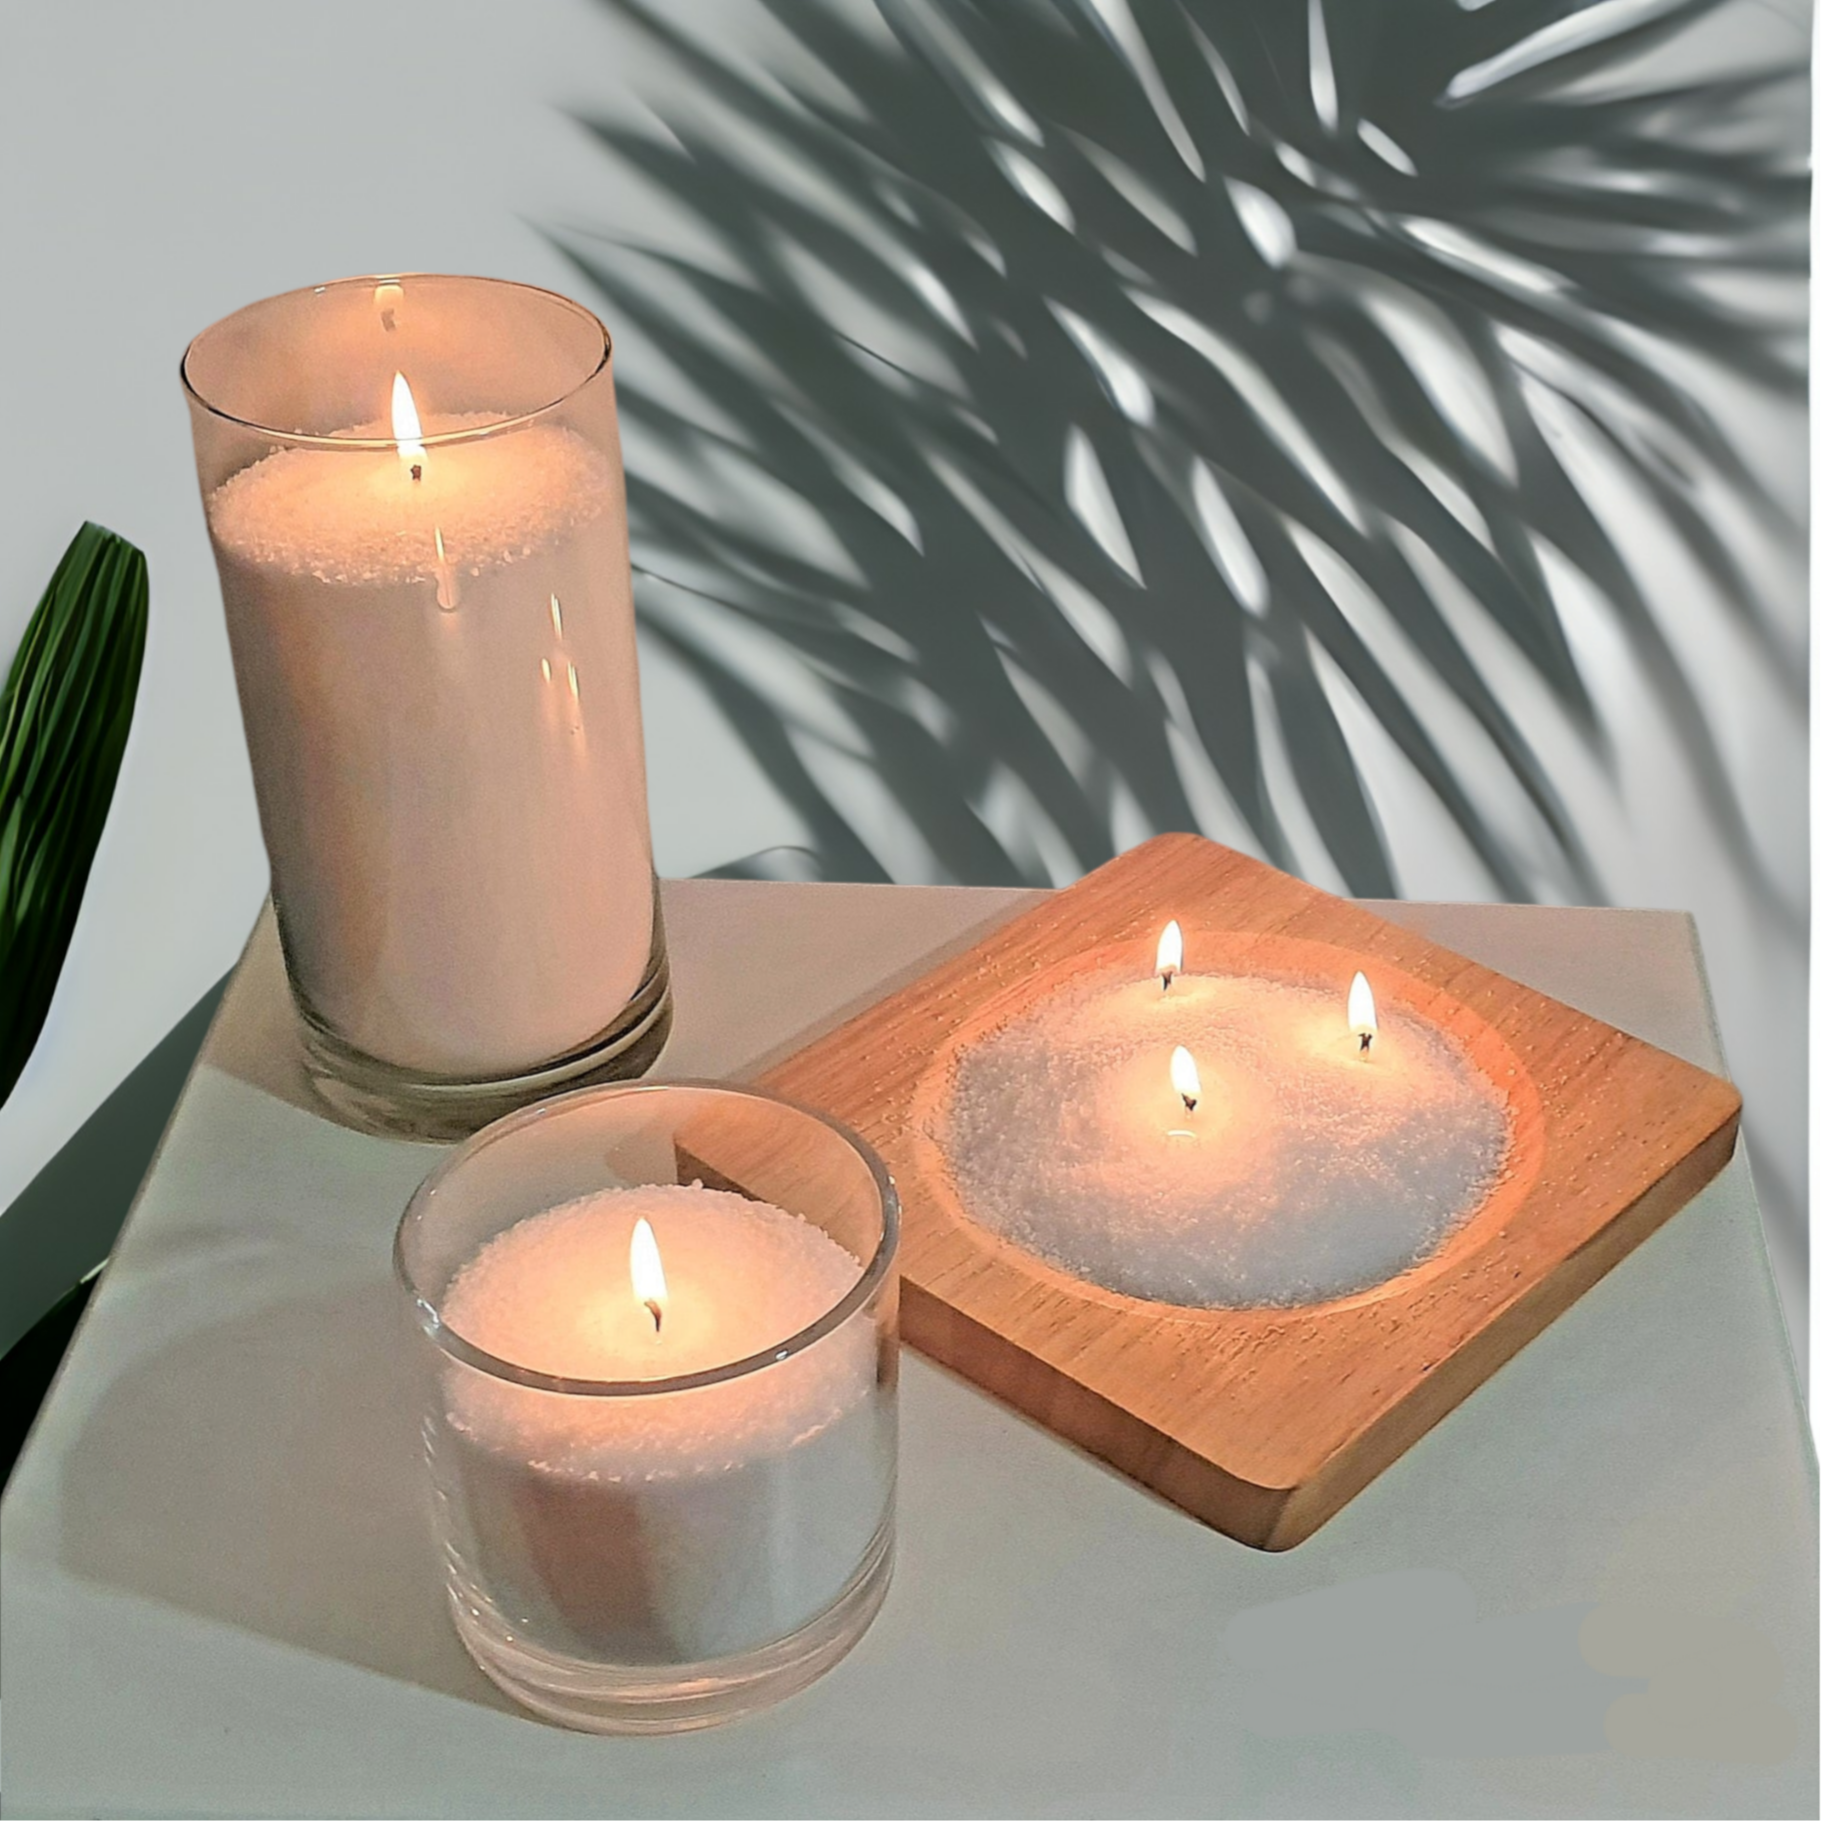 The Ultimate Candle Sand Experience: Transforming Ordinary Candles